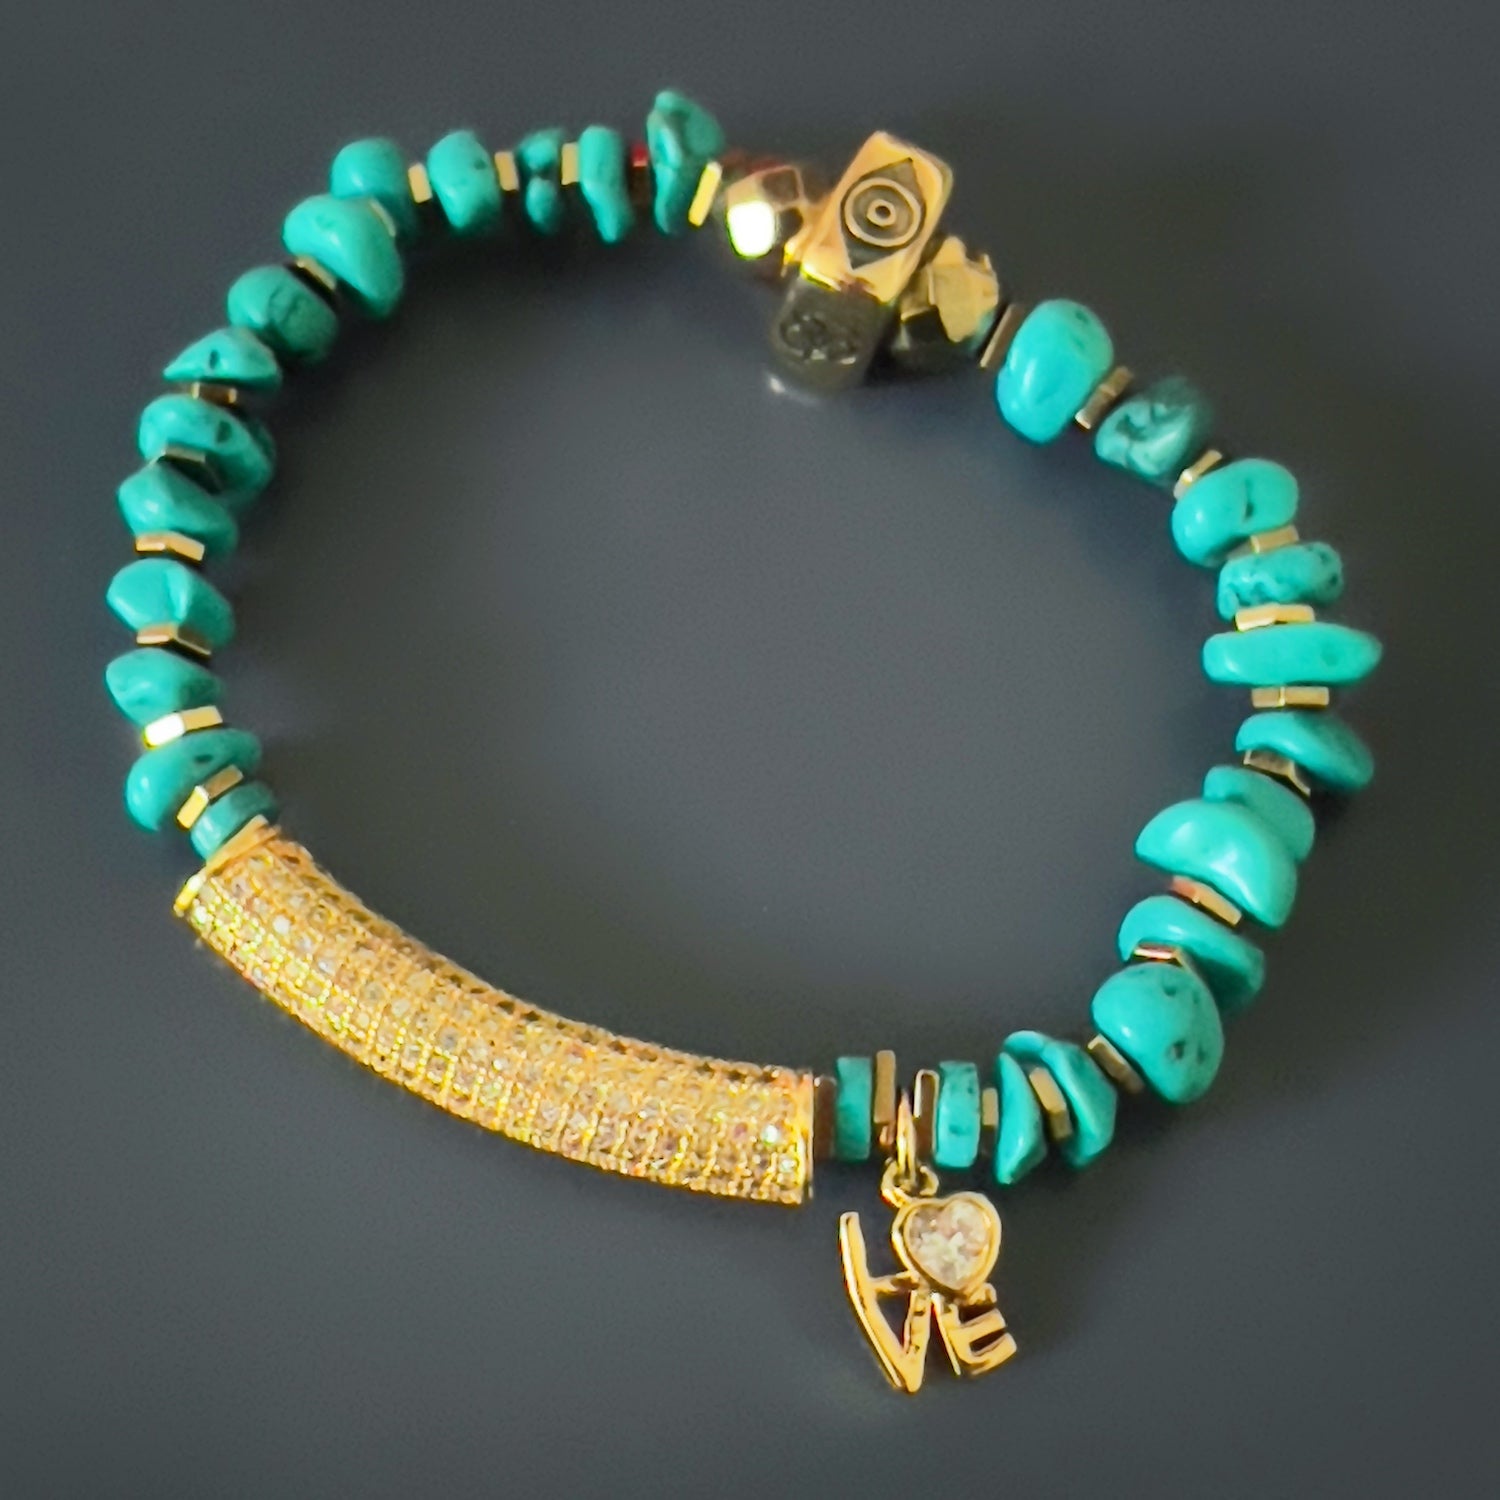 the Diamond and Turquoise Love Bracelet, showcasing its stunning combination of natural nugget turquoise stone beads, gold hematite spacers, and a gold plated charm with a simulated diamond. 